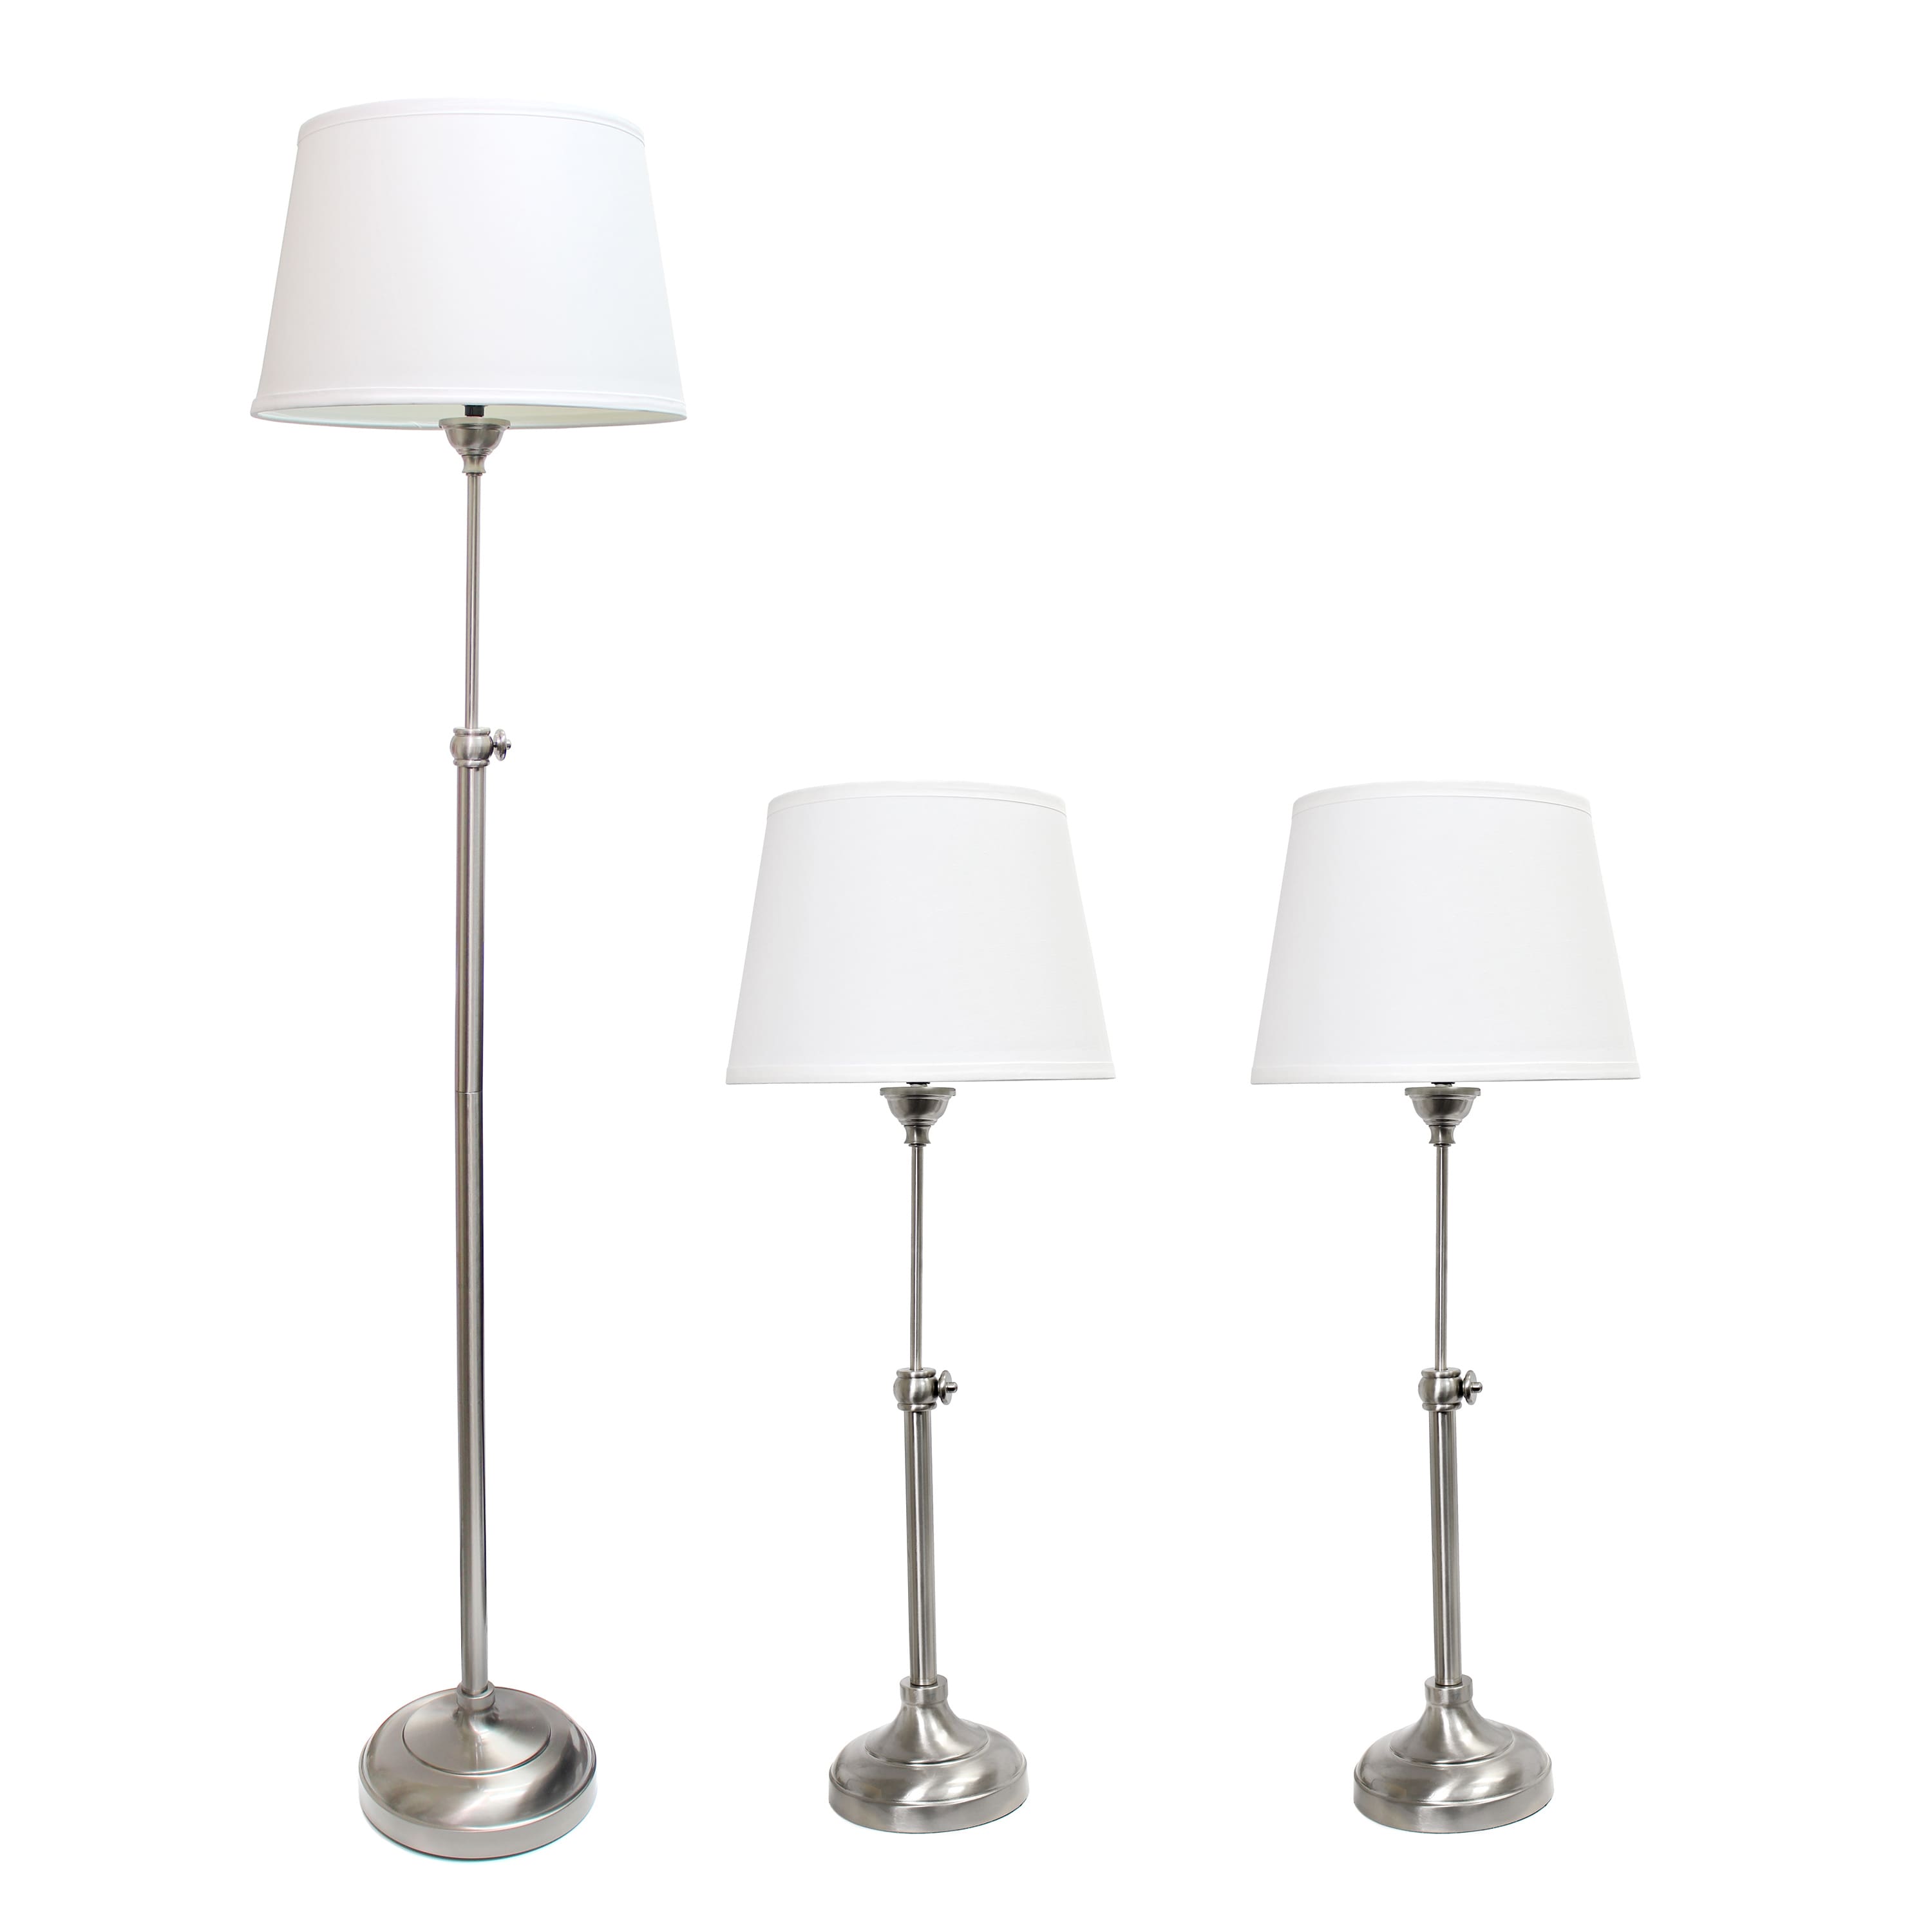 Lalia Home Brushed Nickel Extendable Lamp Set